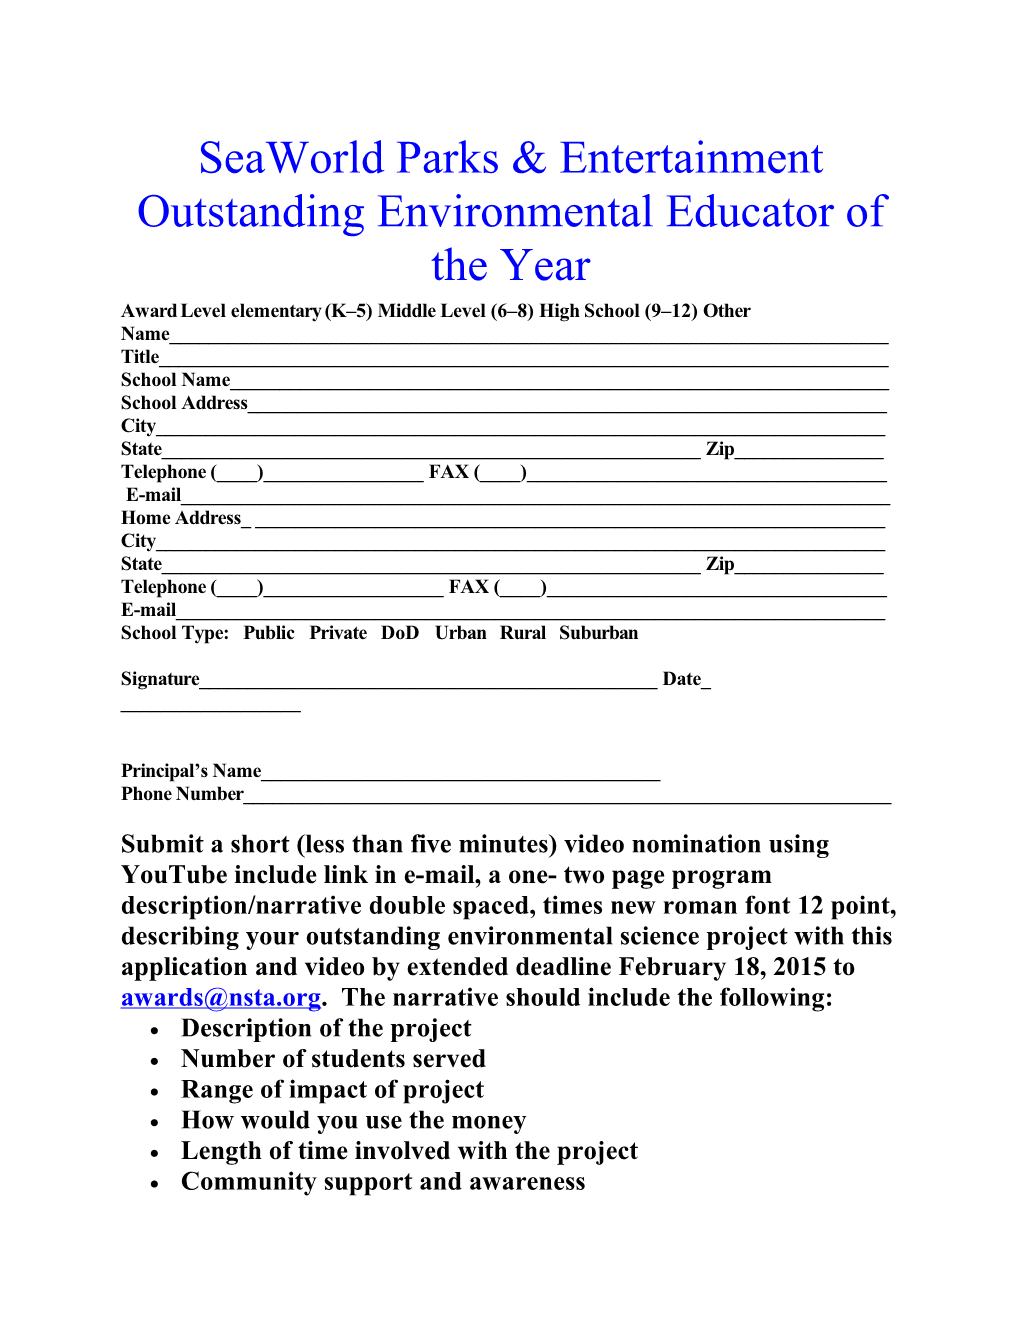 Seaworld Parks & Entertainment Outstanding Environmental Educator of the Year